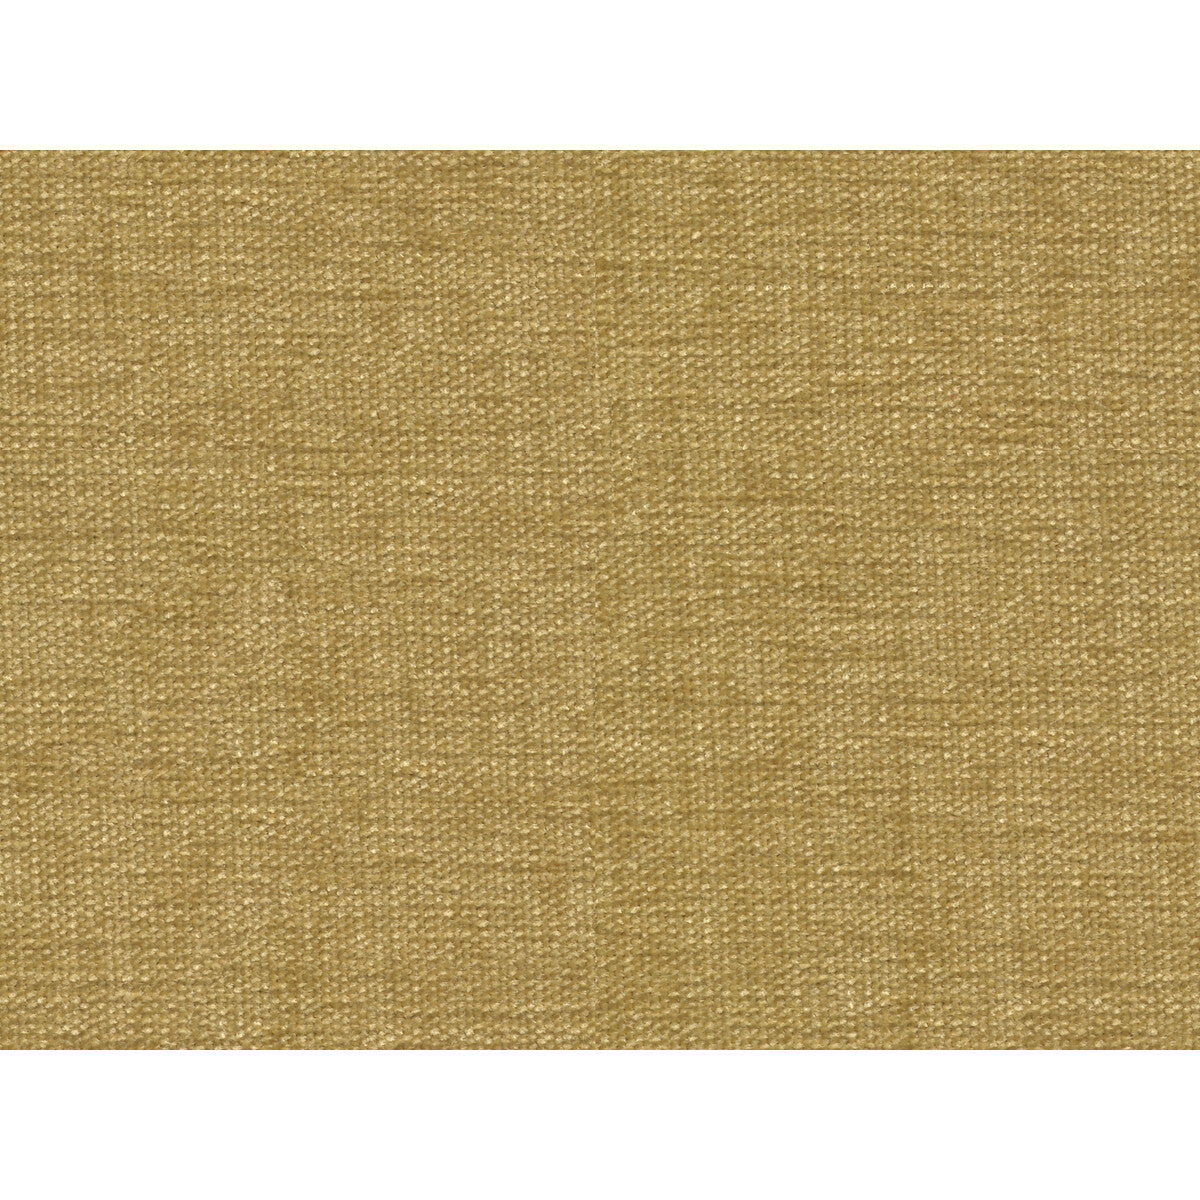 Kravet Contract fabric in 34961-414 color - pattern 34961.414.0 - by Kravet Contract in the Performance Kravetarmor collection